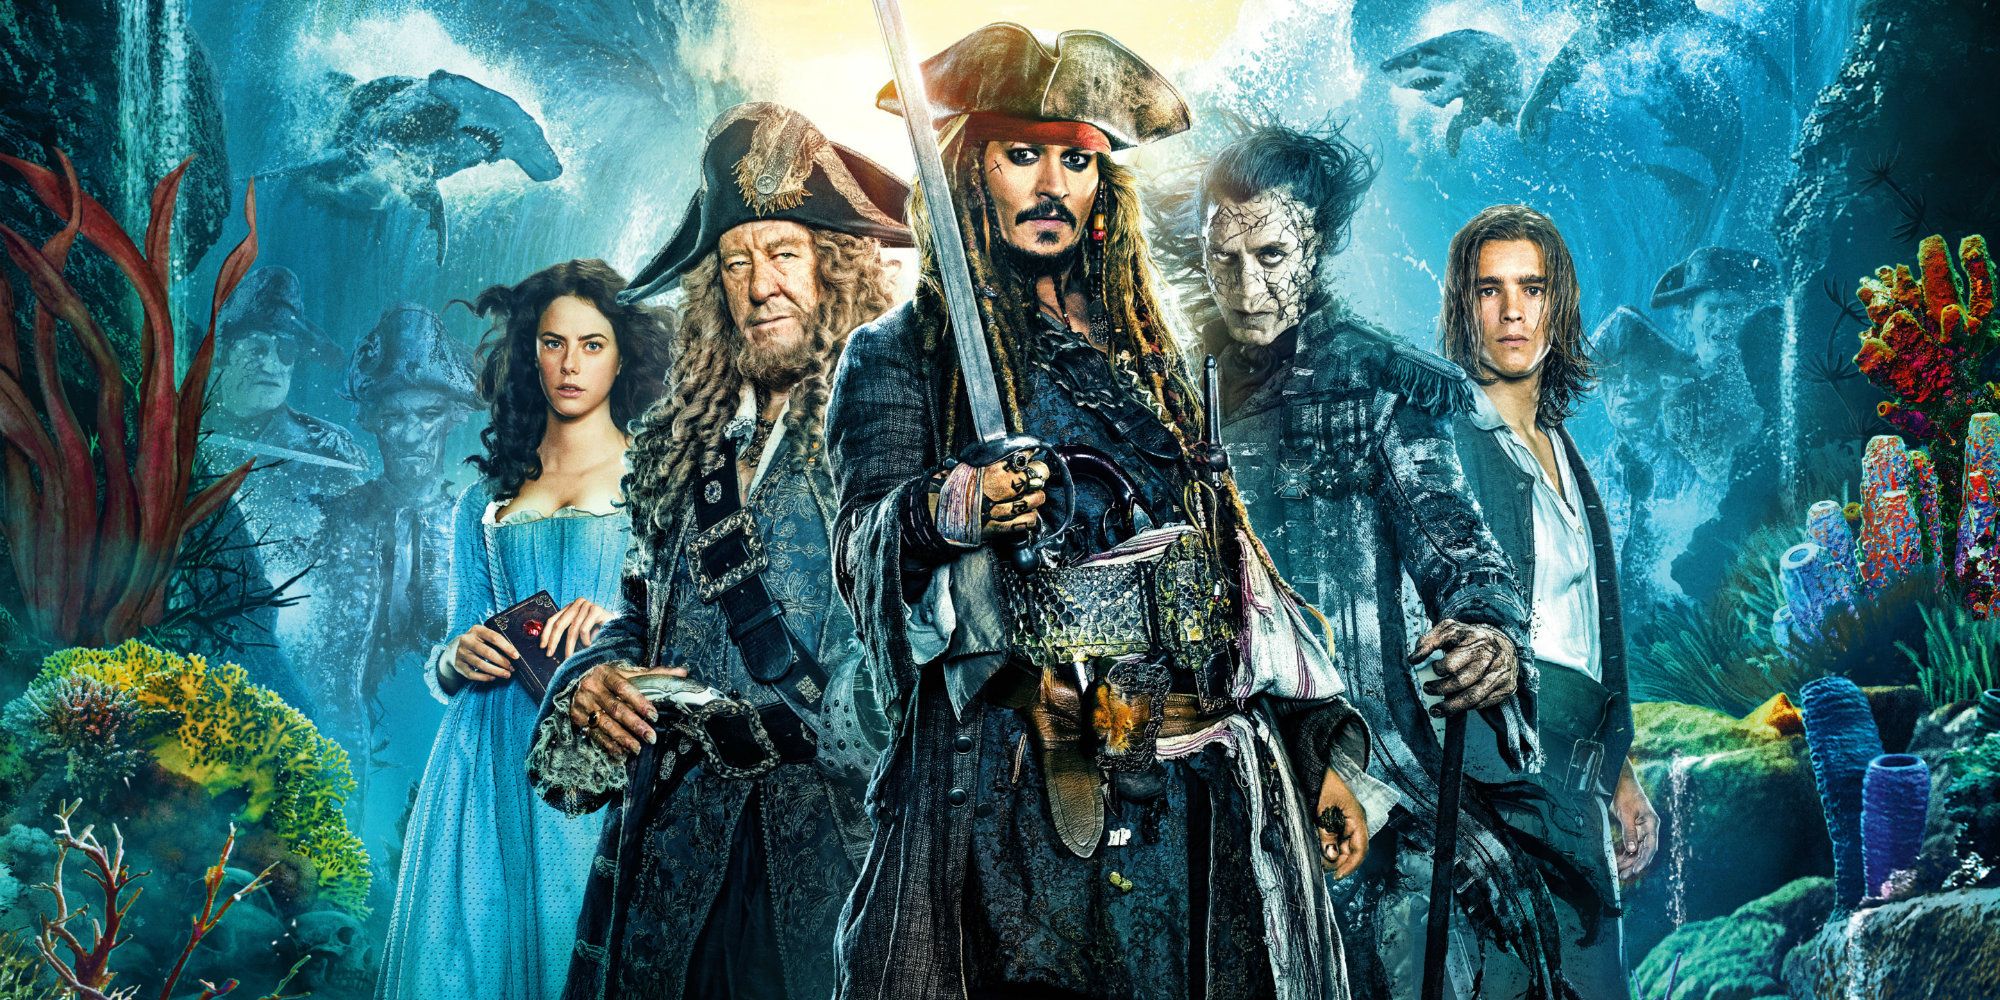 Pirates of the Caribbean 5 Directors ‘Curious’ About Franchise Future